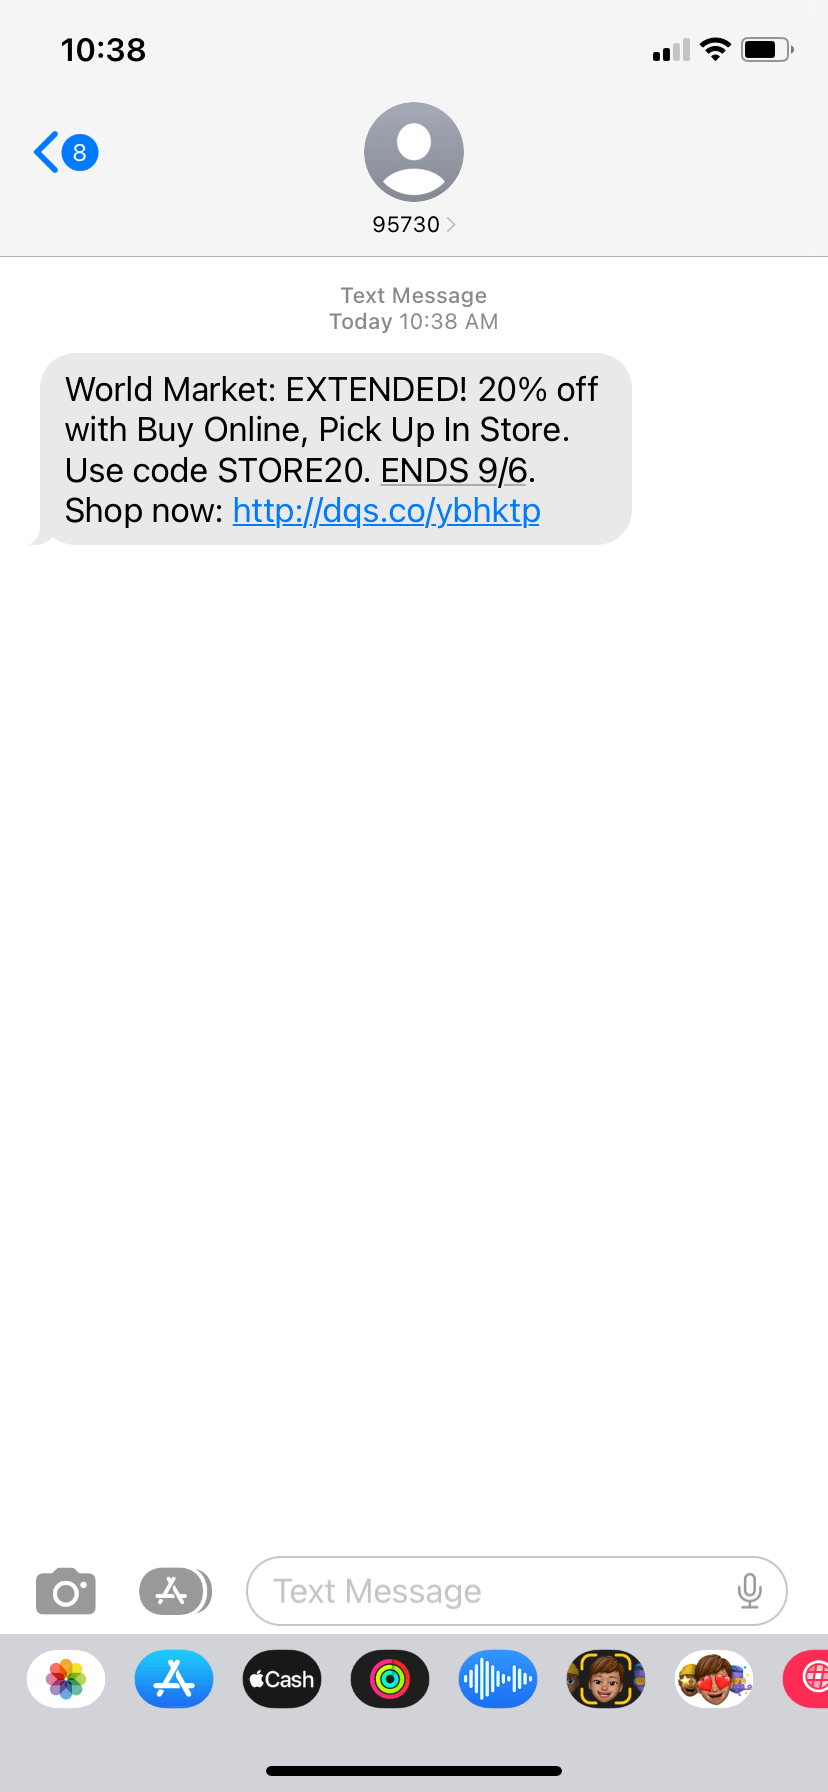 Screenshot of a World Market text that reads “EXTENDED! 20% off with Buy Online, Pick Up In Store. Use code STORE20. ENDS 9/6. Shop now: http://dgs.co/ybhktp”